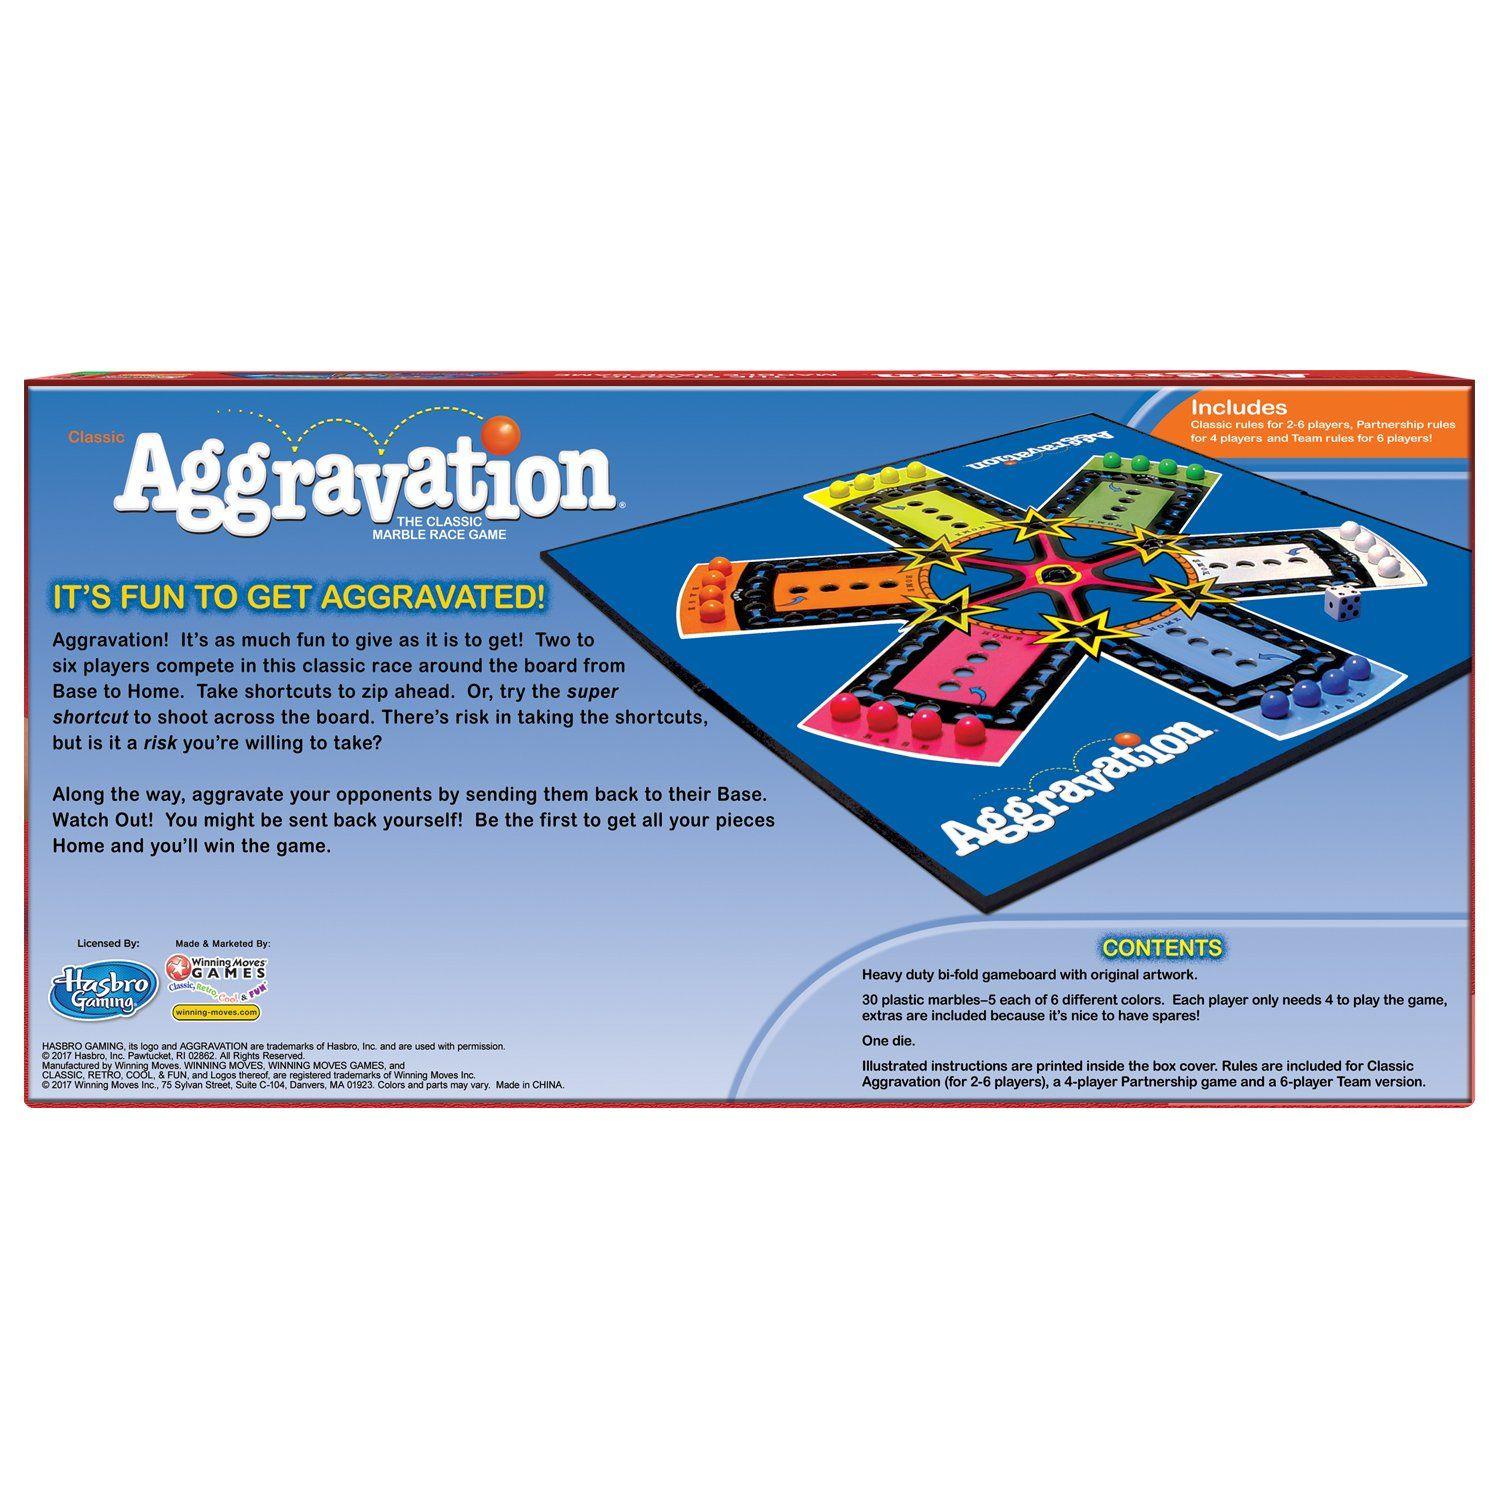 Using Marbles Starting with G Logo - Amazon.com: Aggravation: Winning Moves: Toys & Games